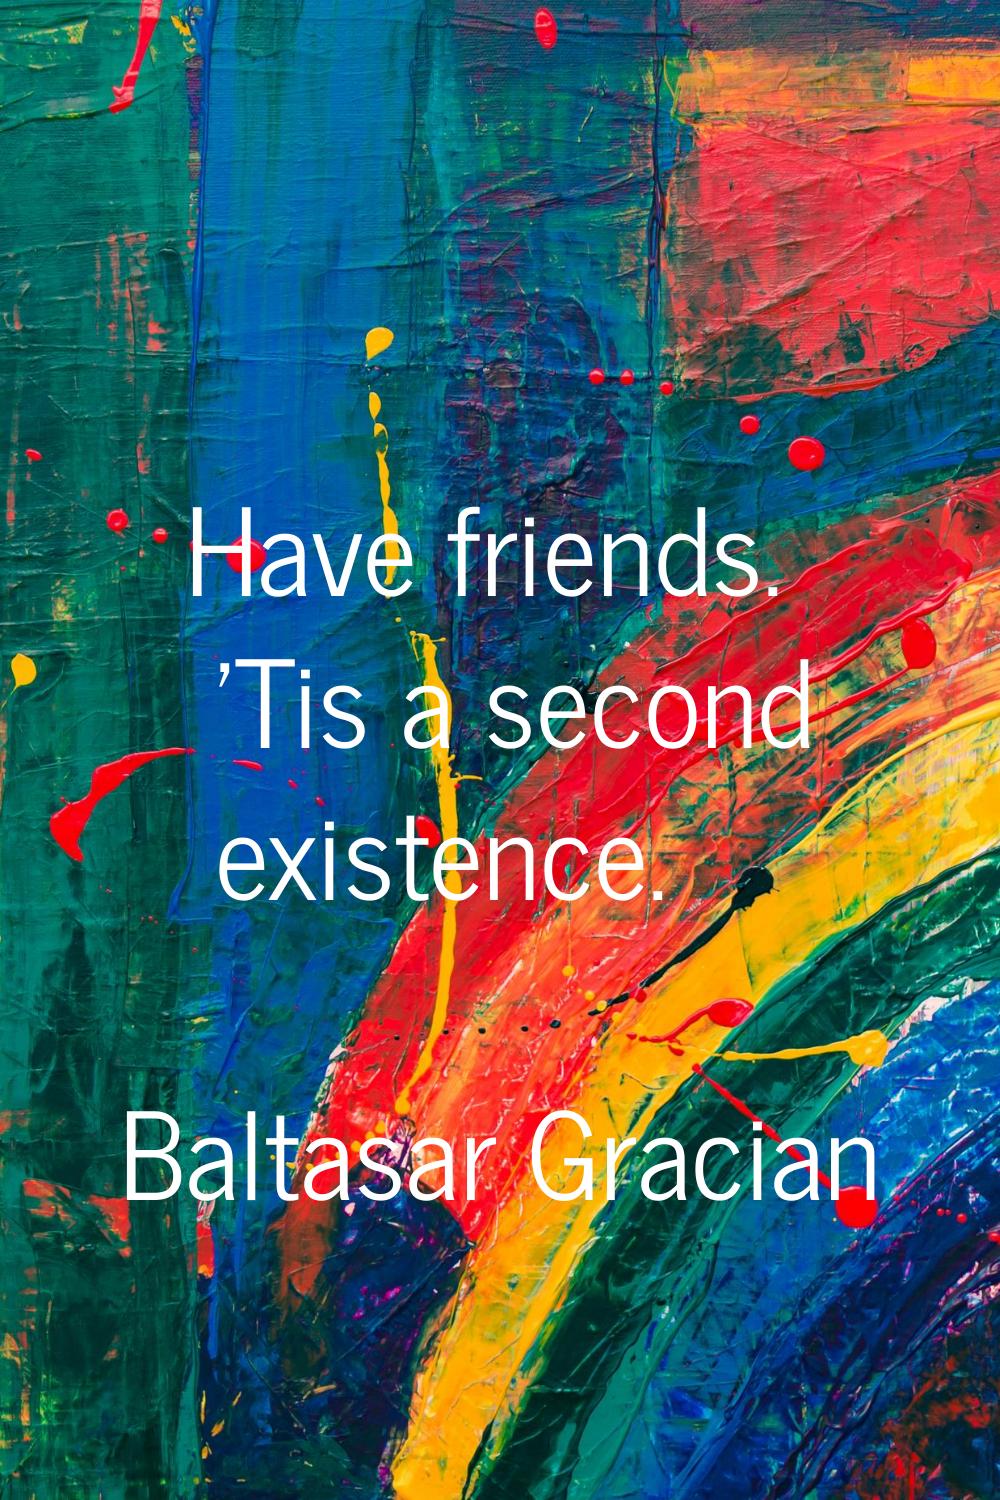 Have friends. 'Tis a second existence.